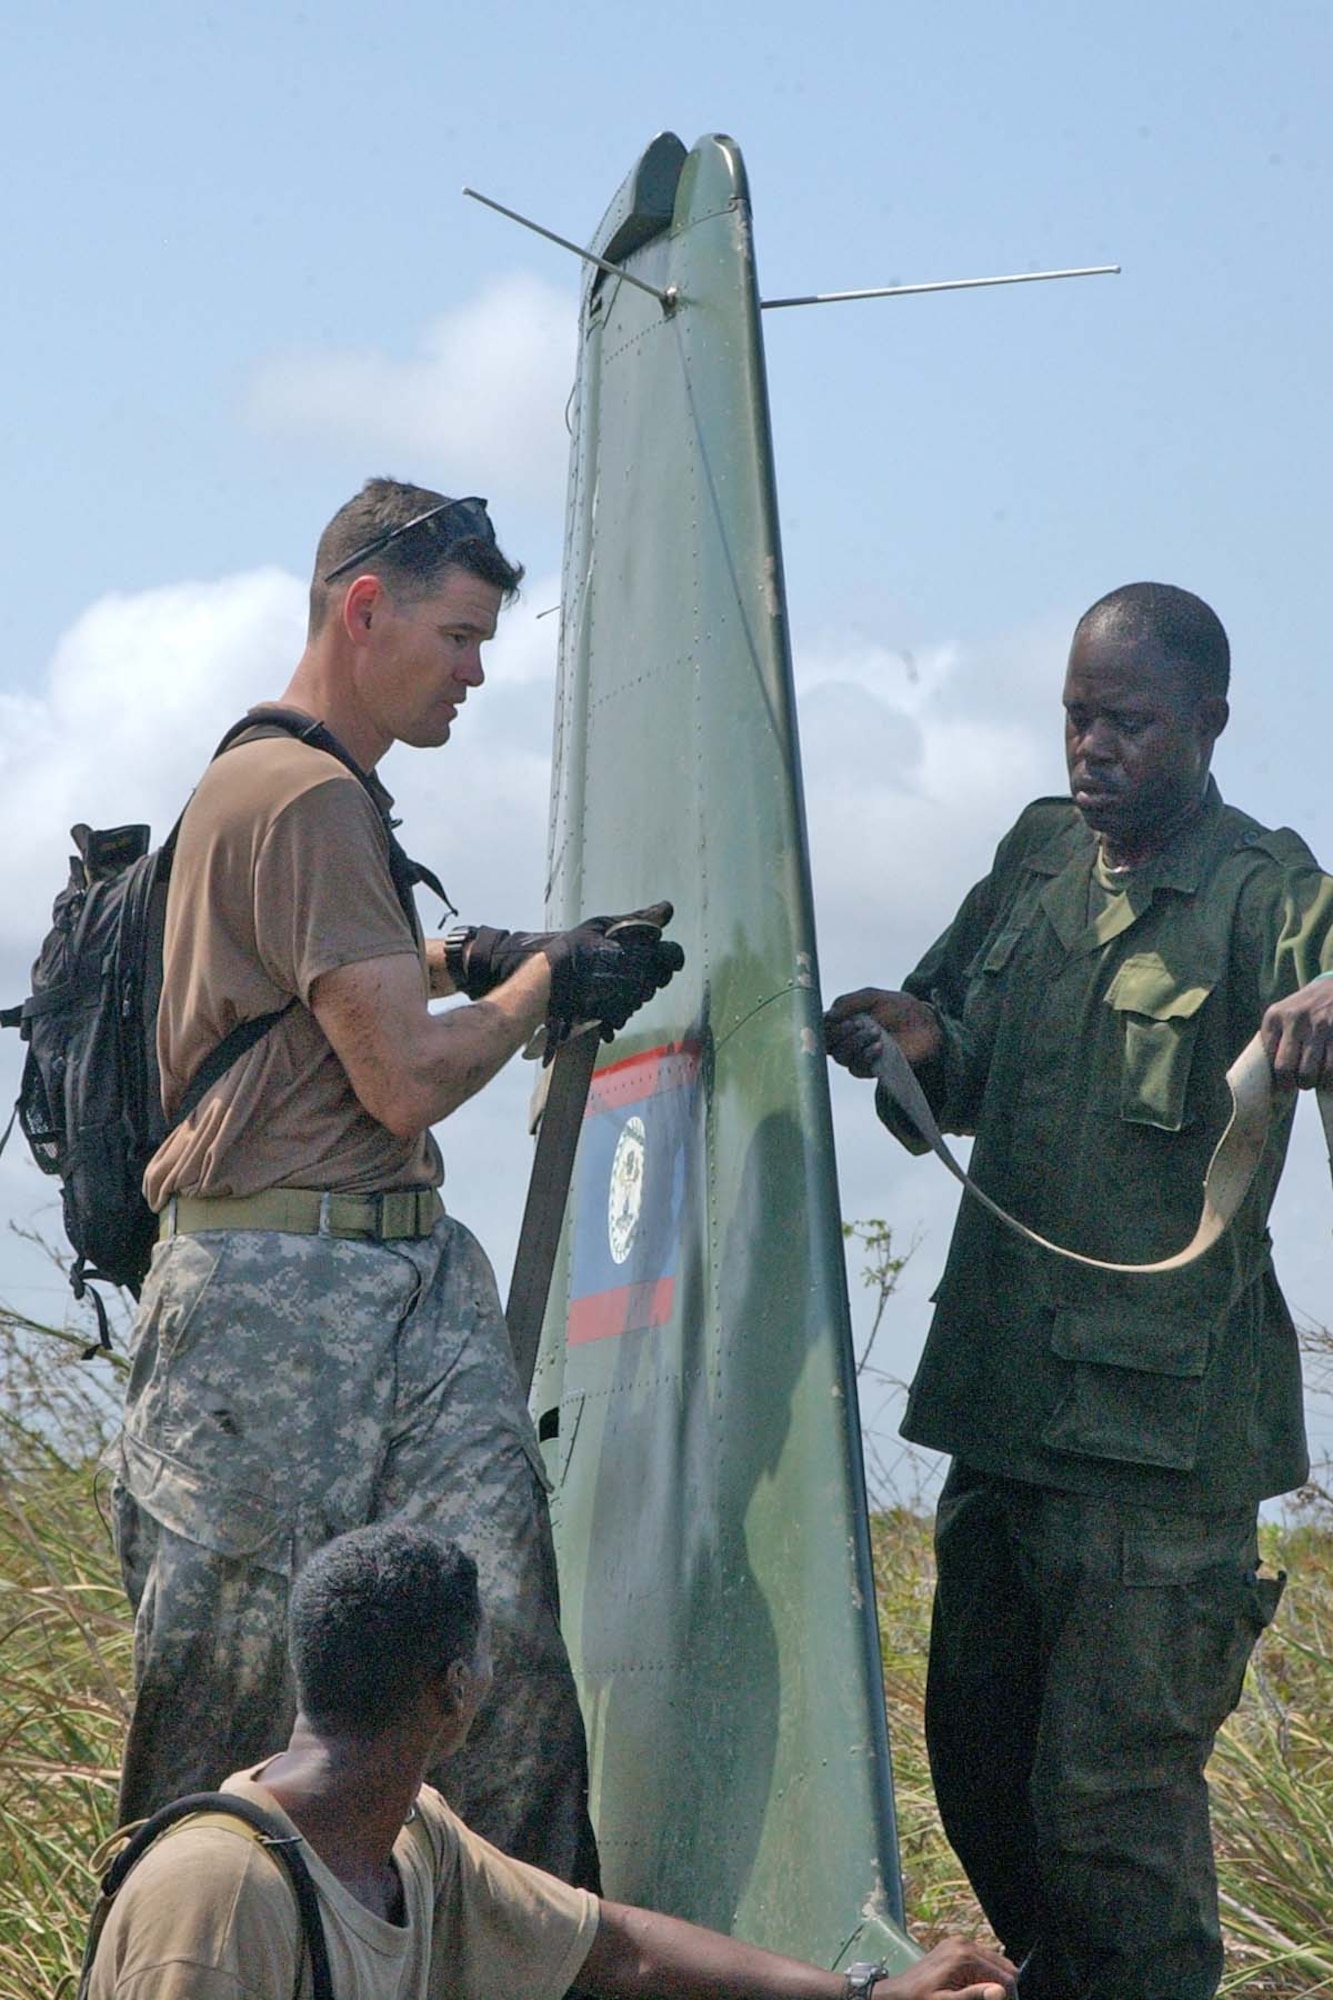 BELIZE CITY, BELIZE -- U.S. Army Sgt. 1st Class Mike Parks, 1st Battalion, 228th Aviation Regiment quality control noncommissioned officer in charge, and a soldier from the Belize Defence Force cargo strap the rudder of a downed BDF Defender aircraft. The downed BDF Defender aircraft was successfully slingloaded onto a U.S. Army UH-60 Black Hawk helicopter and delivered to the BDF air station at Belize City International Airport May 3. (U.S. Air Force photo by Staff Sgt. Chyenne A. Griffin)                                  